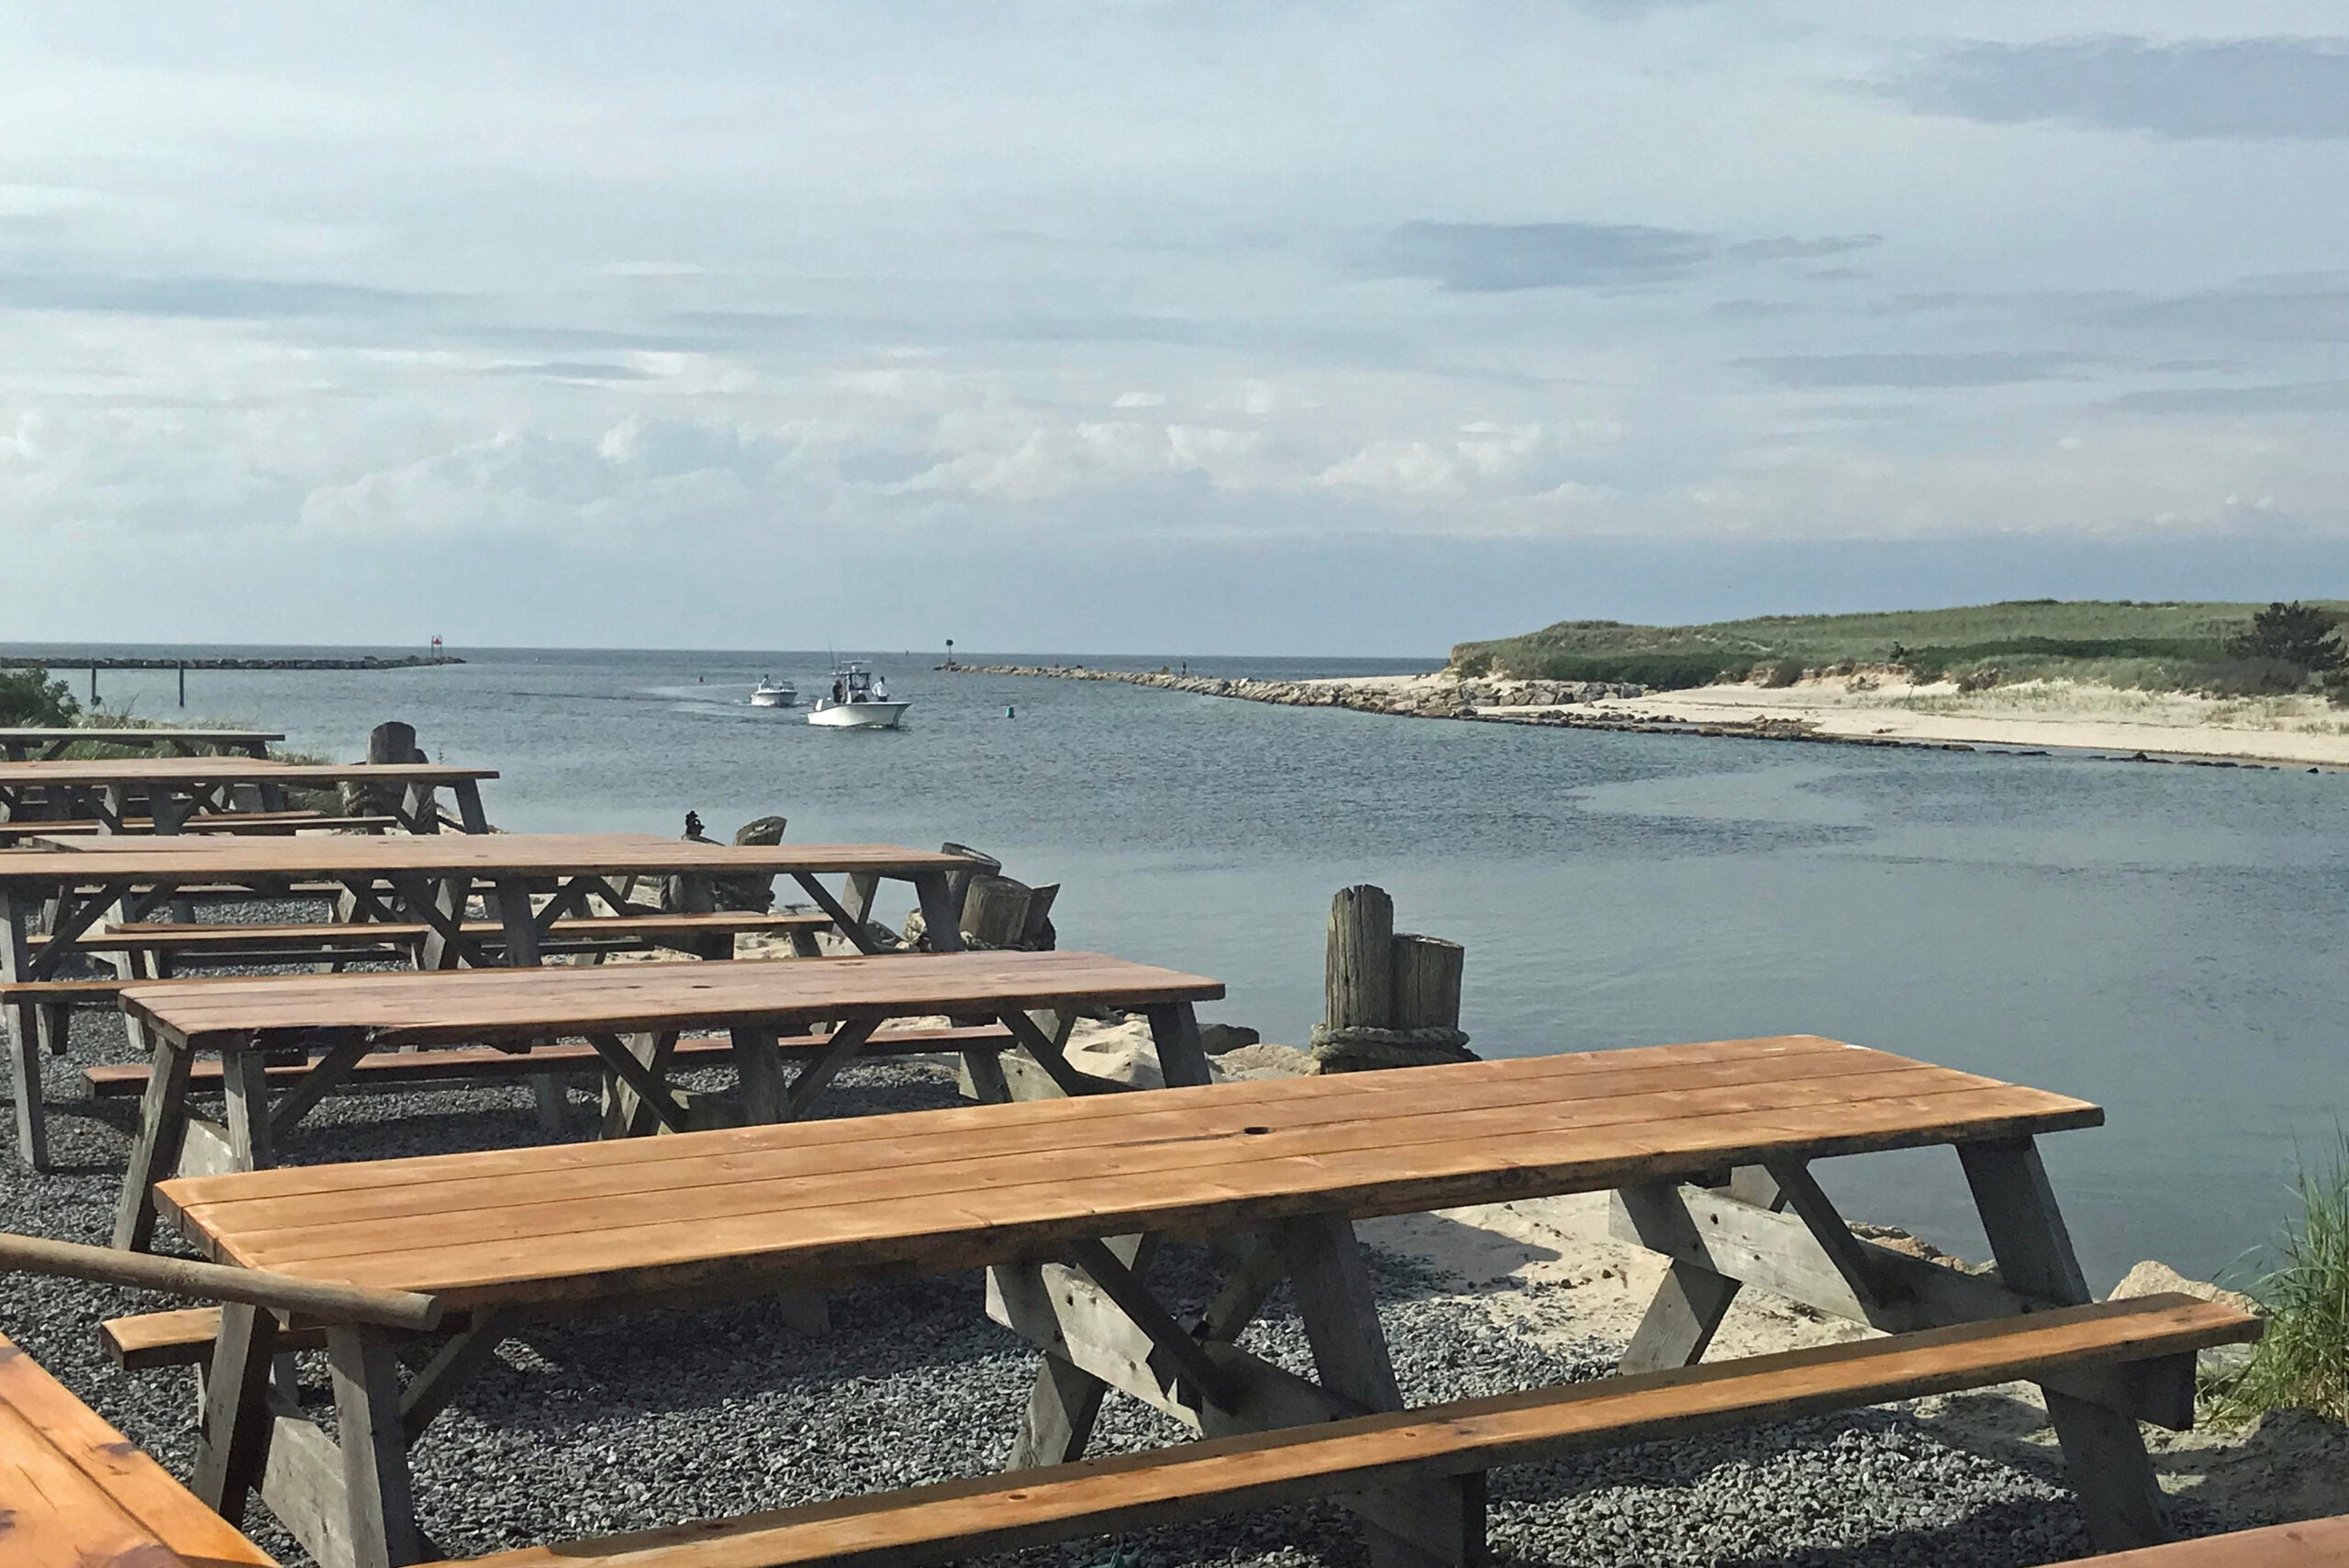 Cape Cod Beach bar, Chapin's Fish and Chips